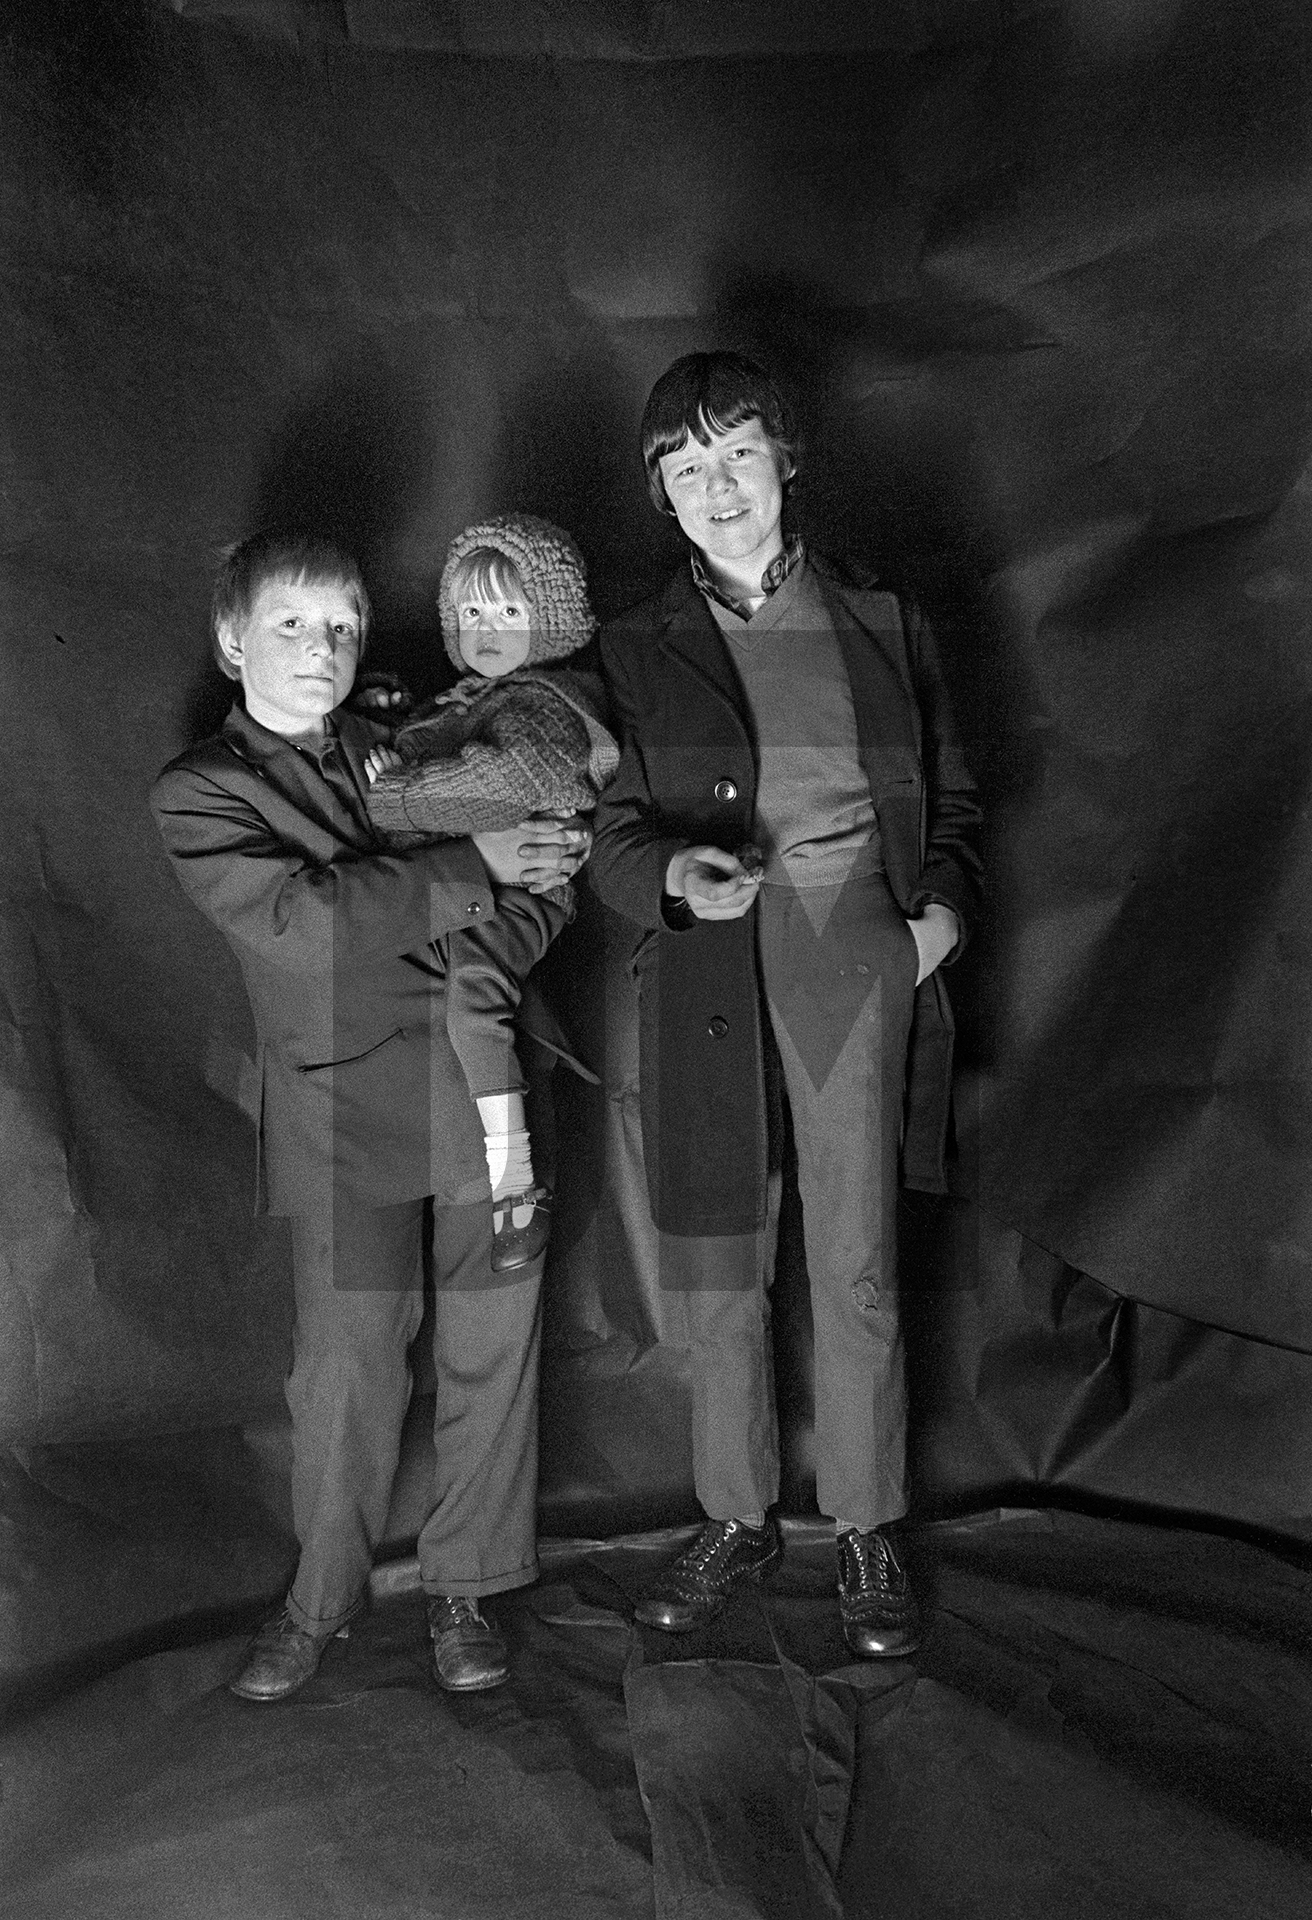 Peter with his sister Gillian and friend Peter Jackson. Group portrait from The Shop on Greame Street, Moss Side, Manchester. February-April 1972 by Daniel Meadows